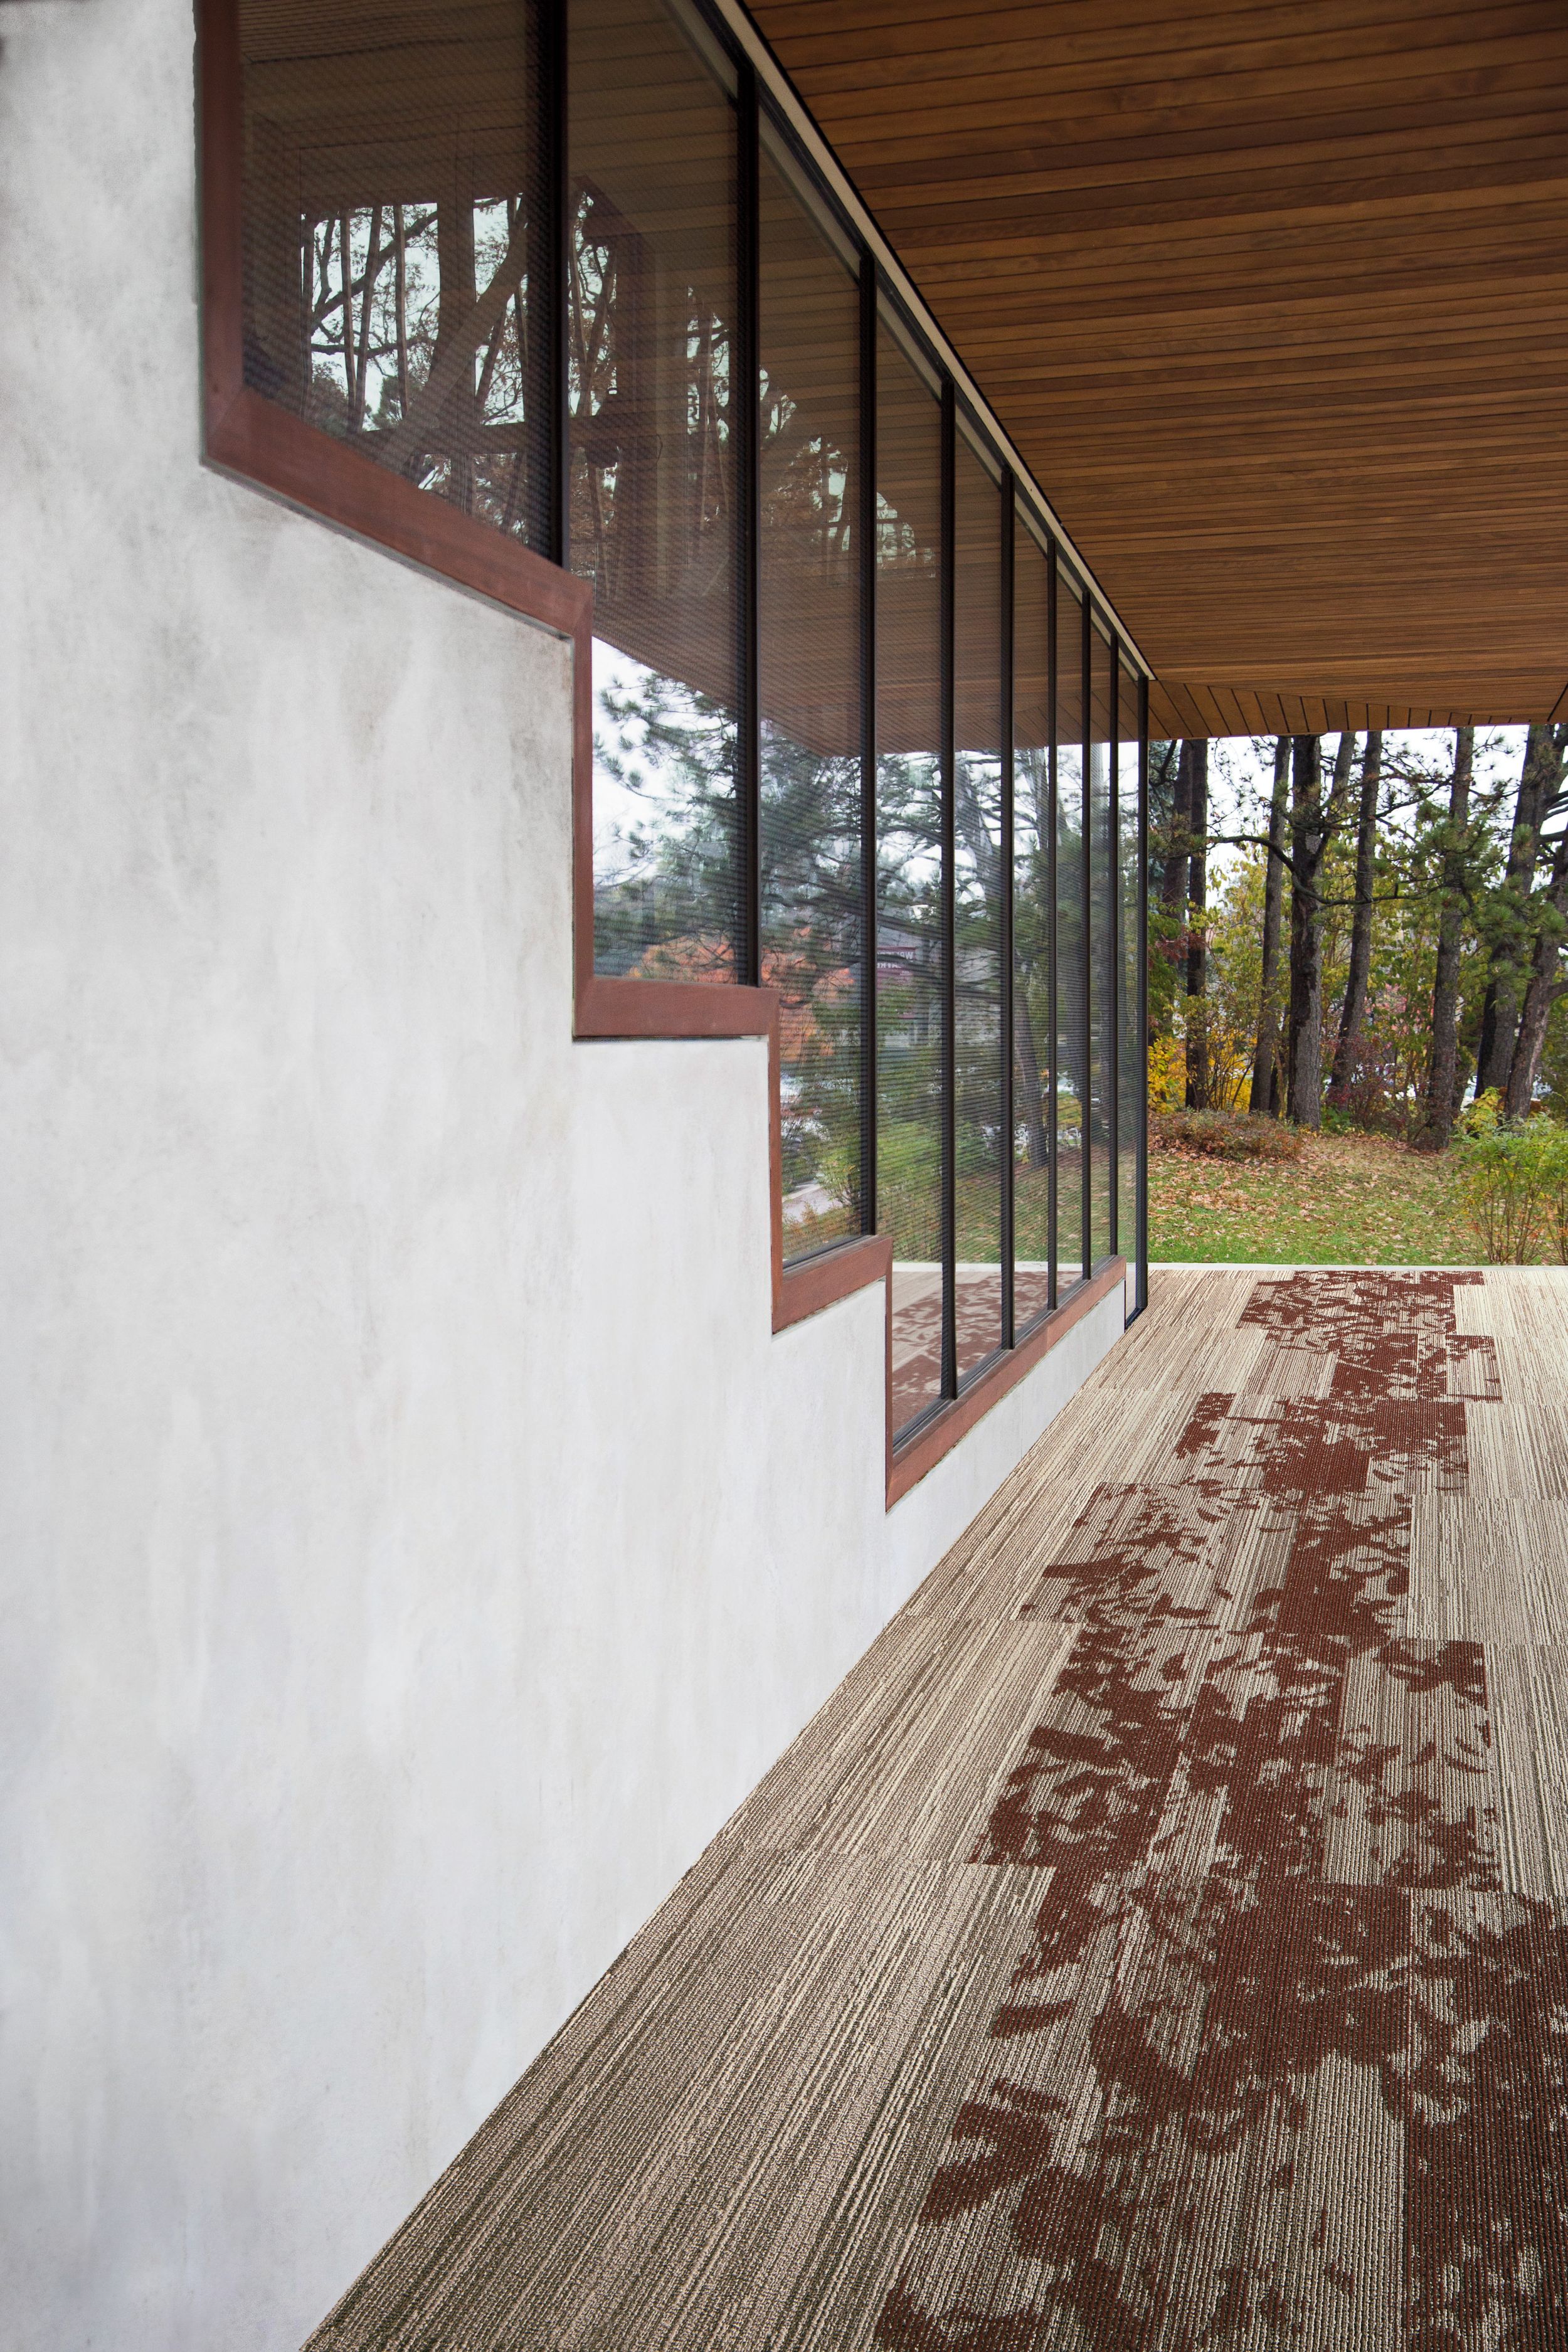 Interface Progression III and Glazing plank carpet tile shown for inspiration in outdoor setting imagen número 12